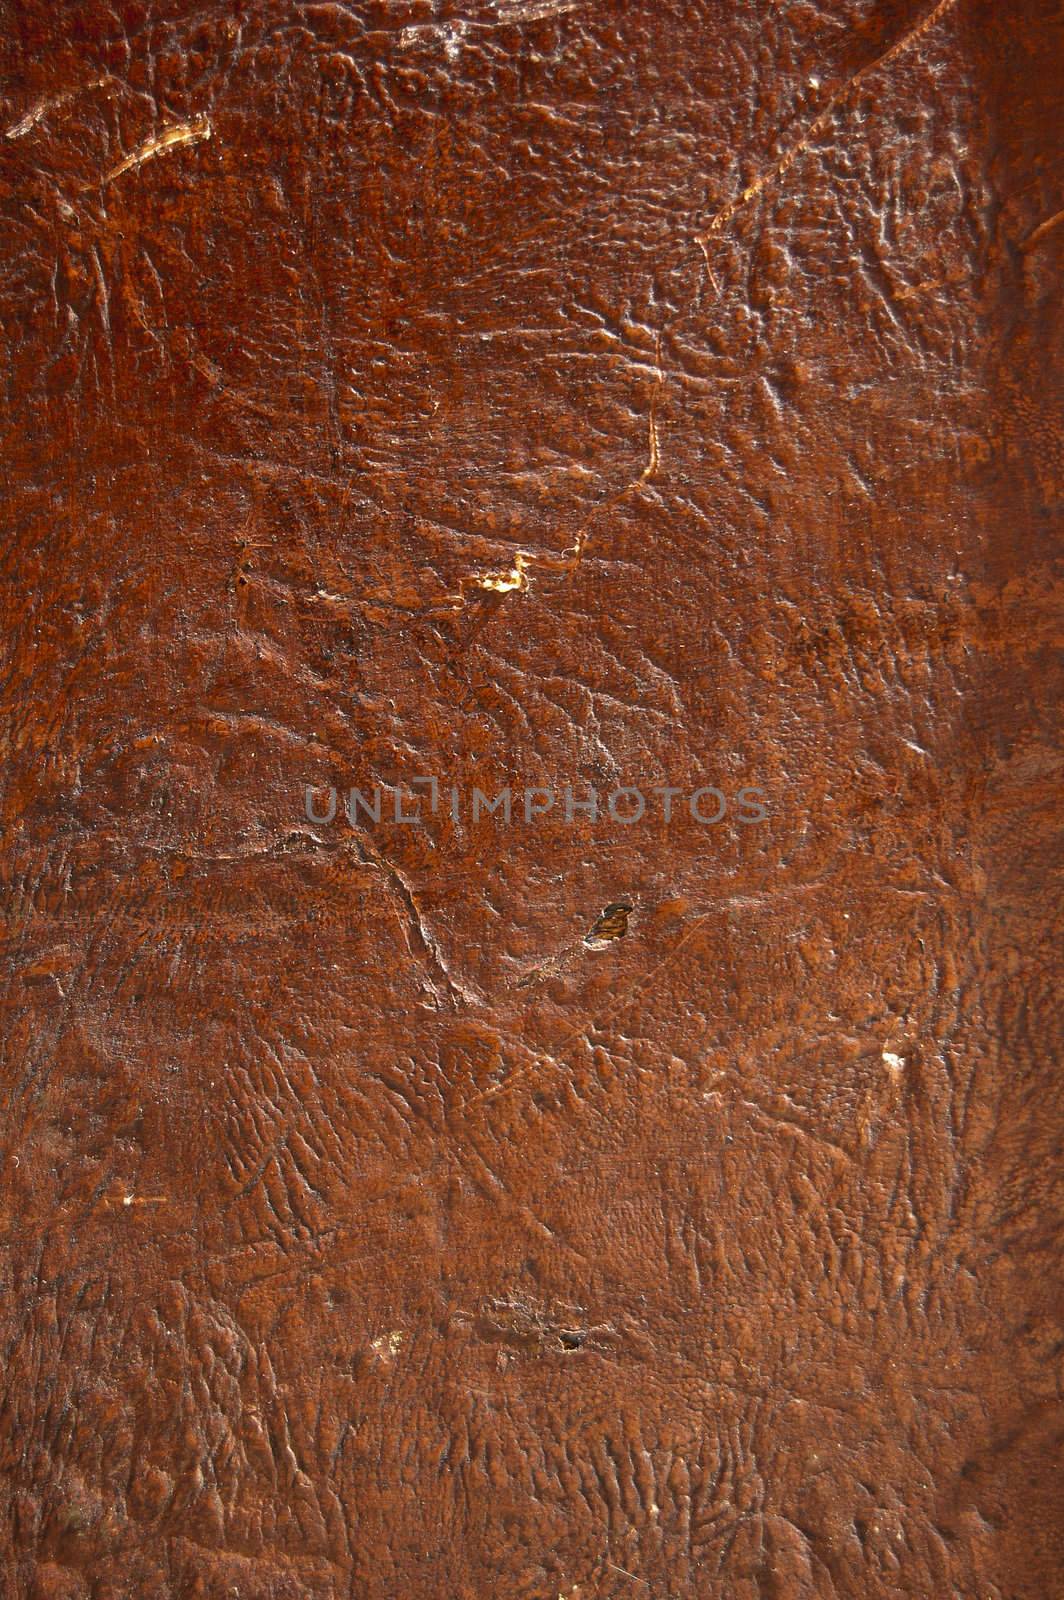 A close up of a brown raw leather